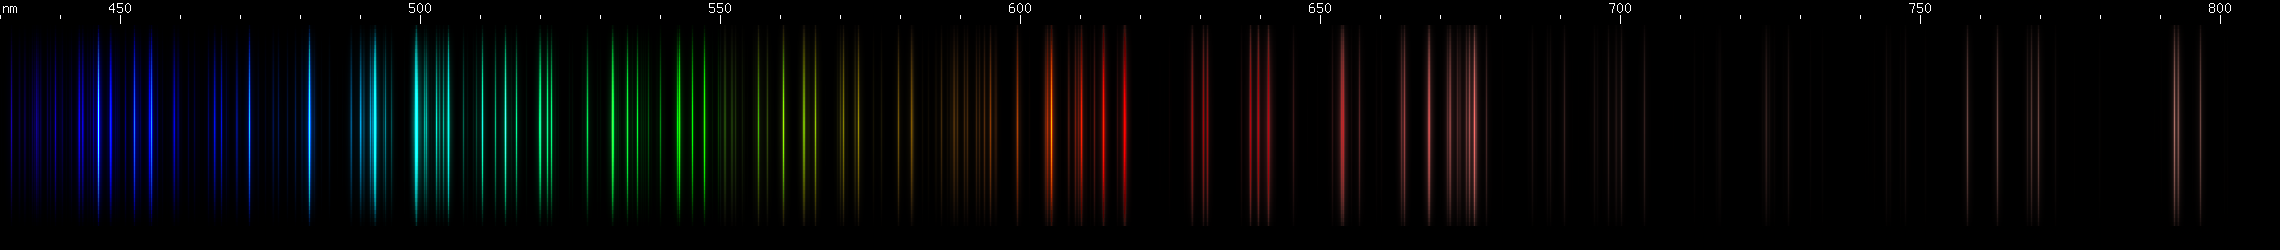 Spectral lines of Sulfur.